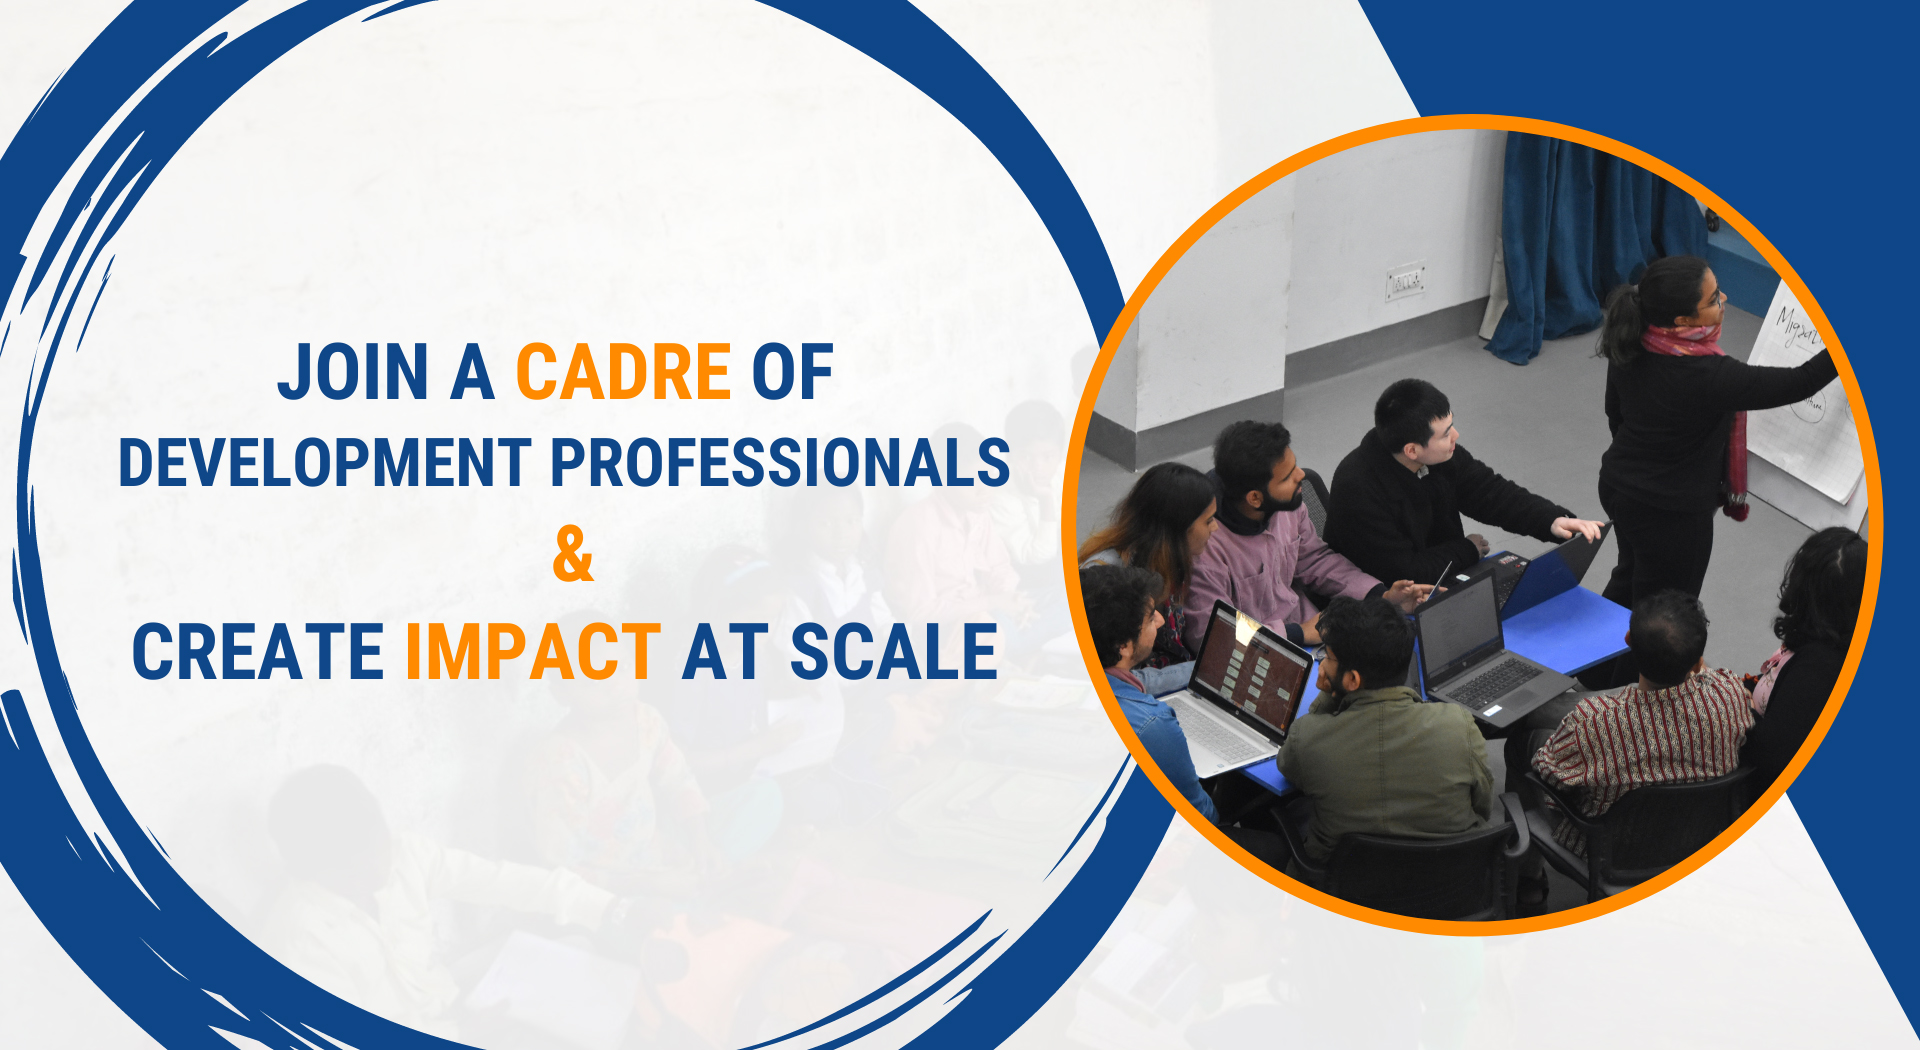 JOIN A CADRE OF DEVELOPMENT PROFESSIONALS & CREATE IMPACT AT SCALE